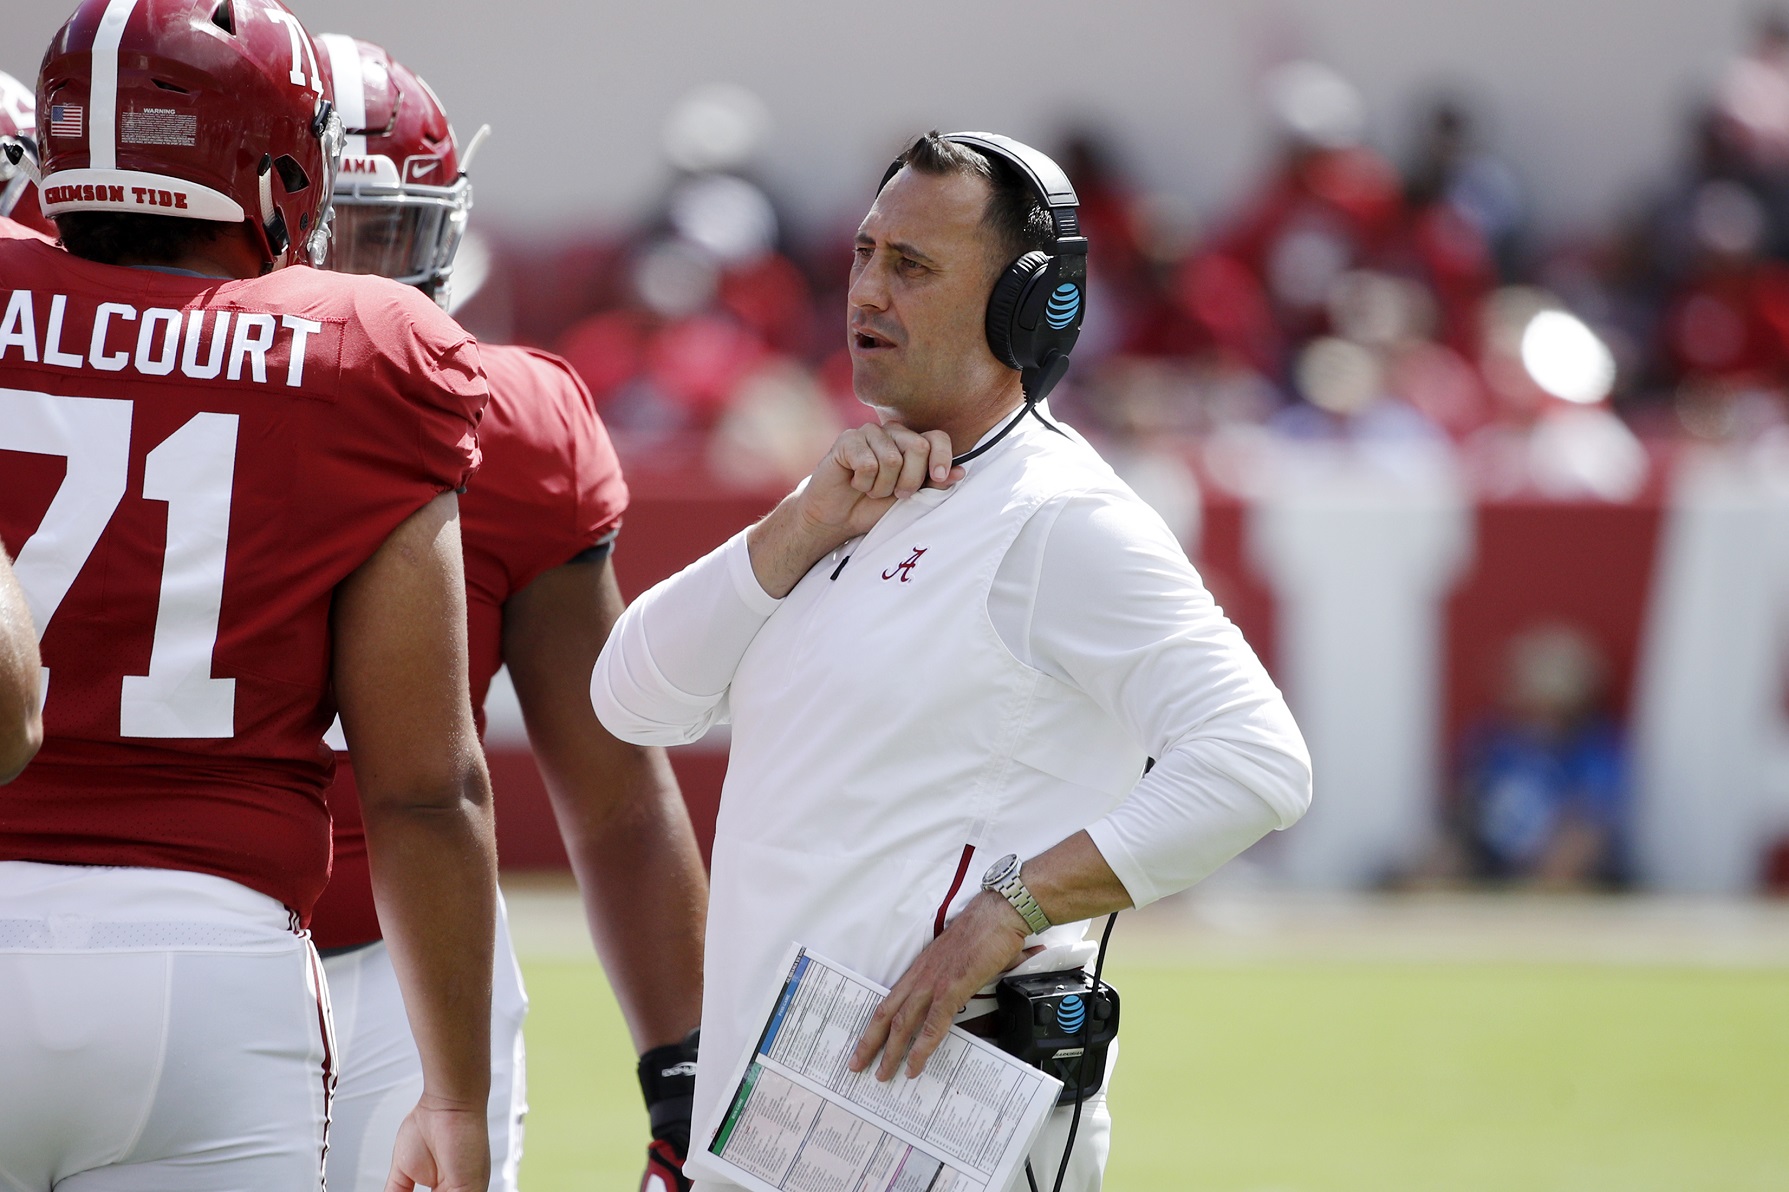 The Texas Longhorns Are About To Make Steve Sarkisian a Dangerously Desperate Hire